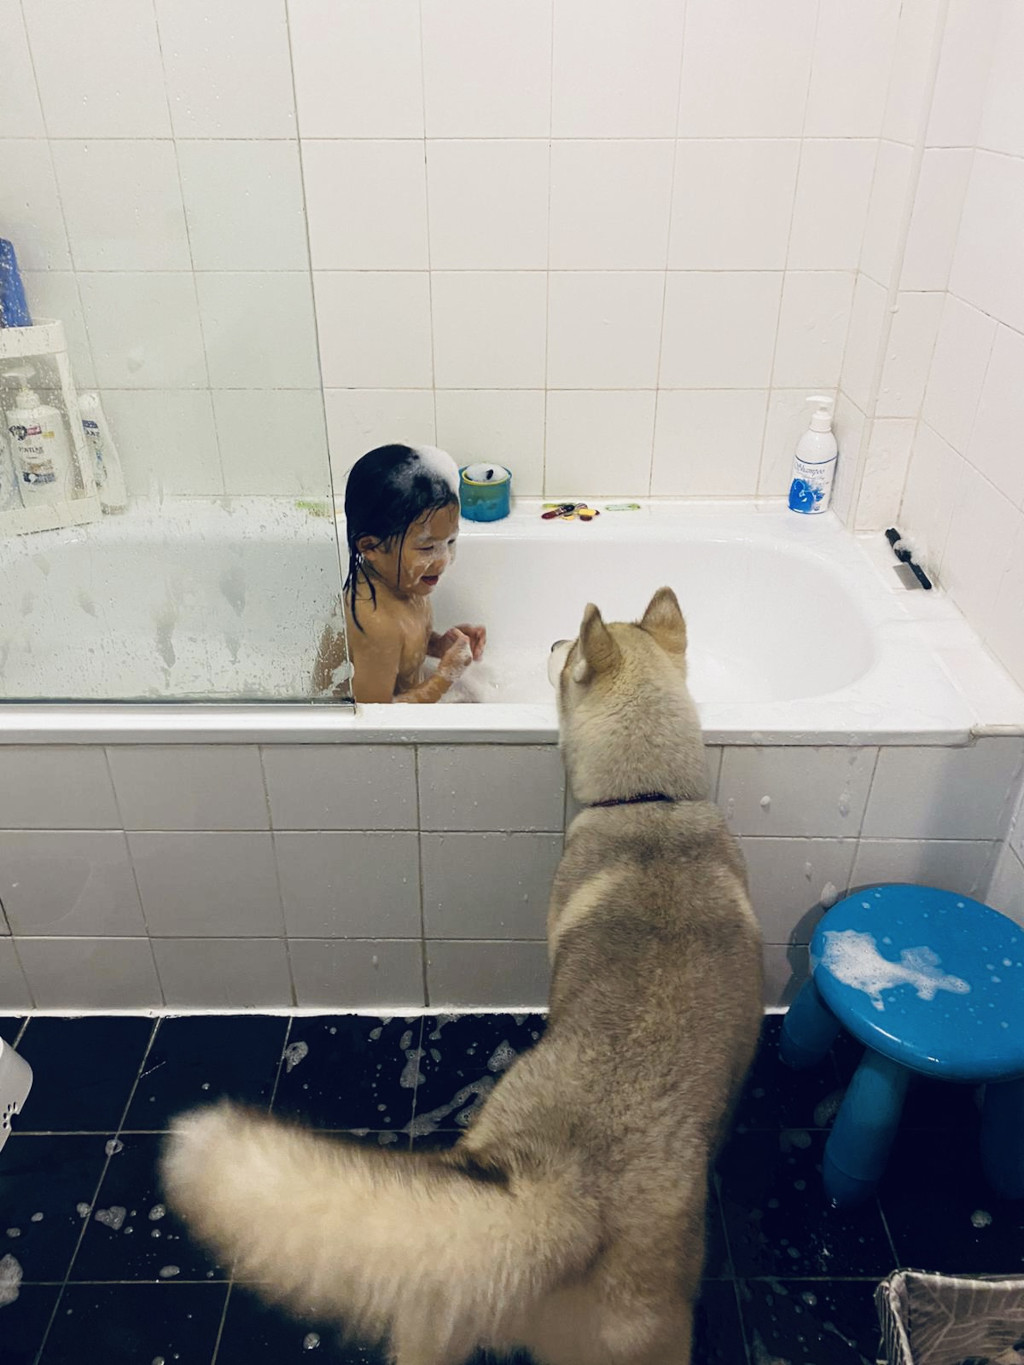 Laissez-faire parenting - Jude having a bath, with Diego the dog